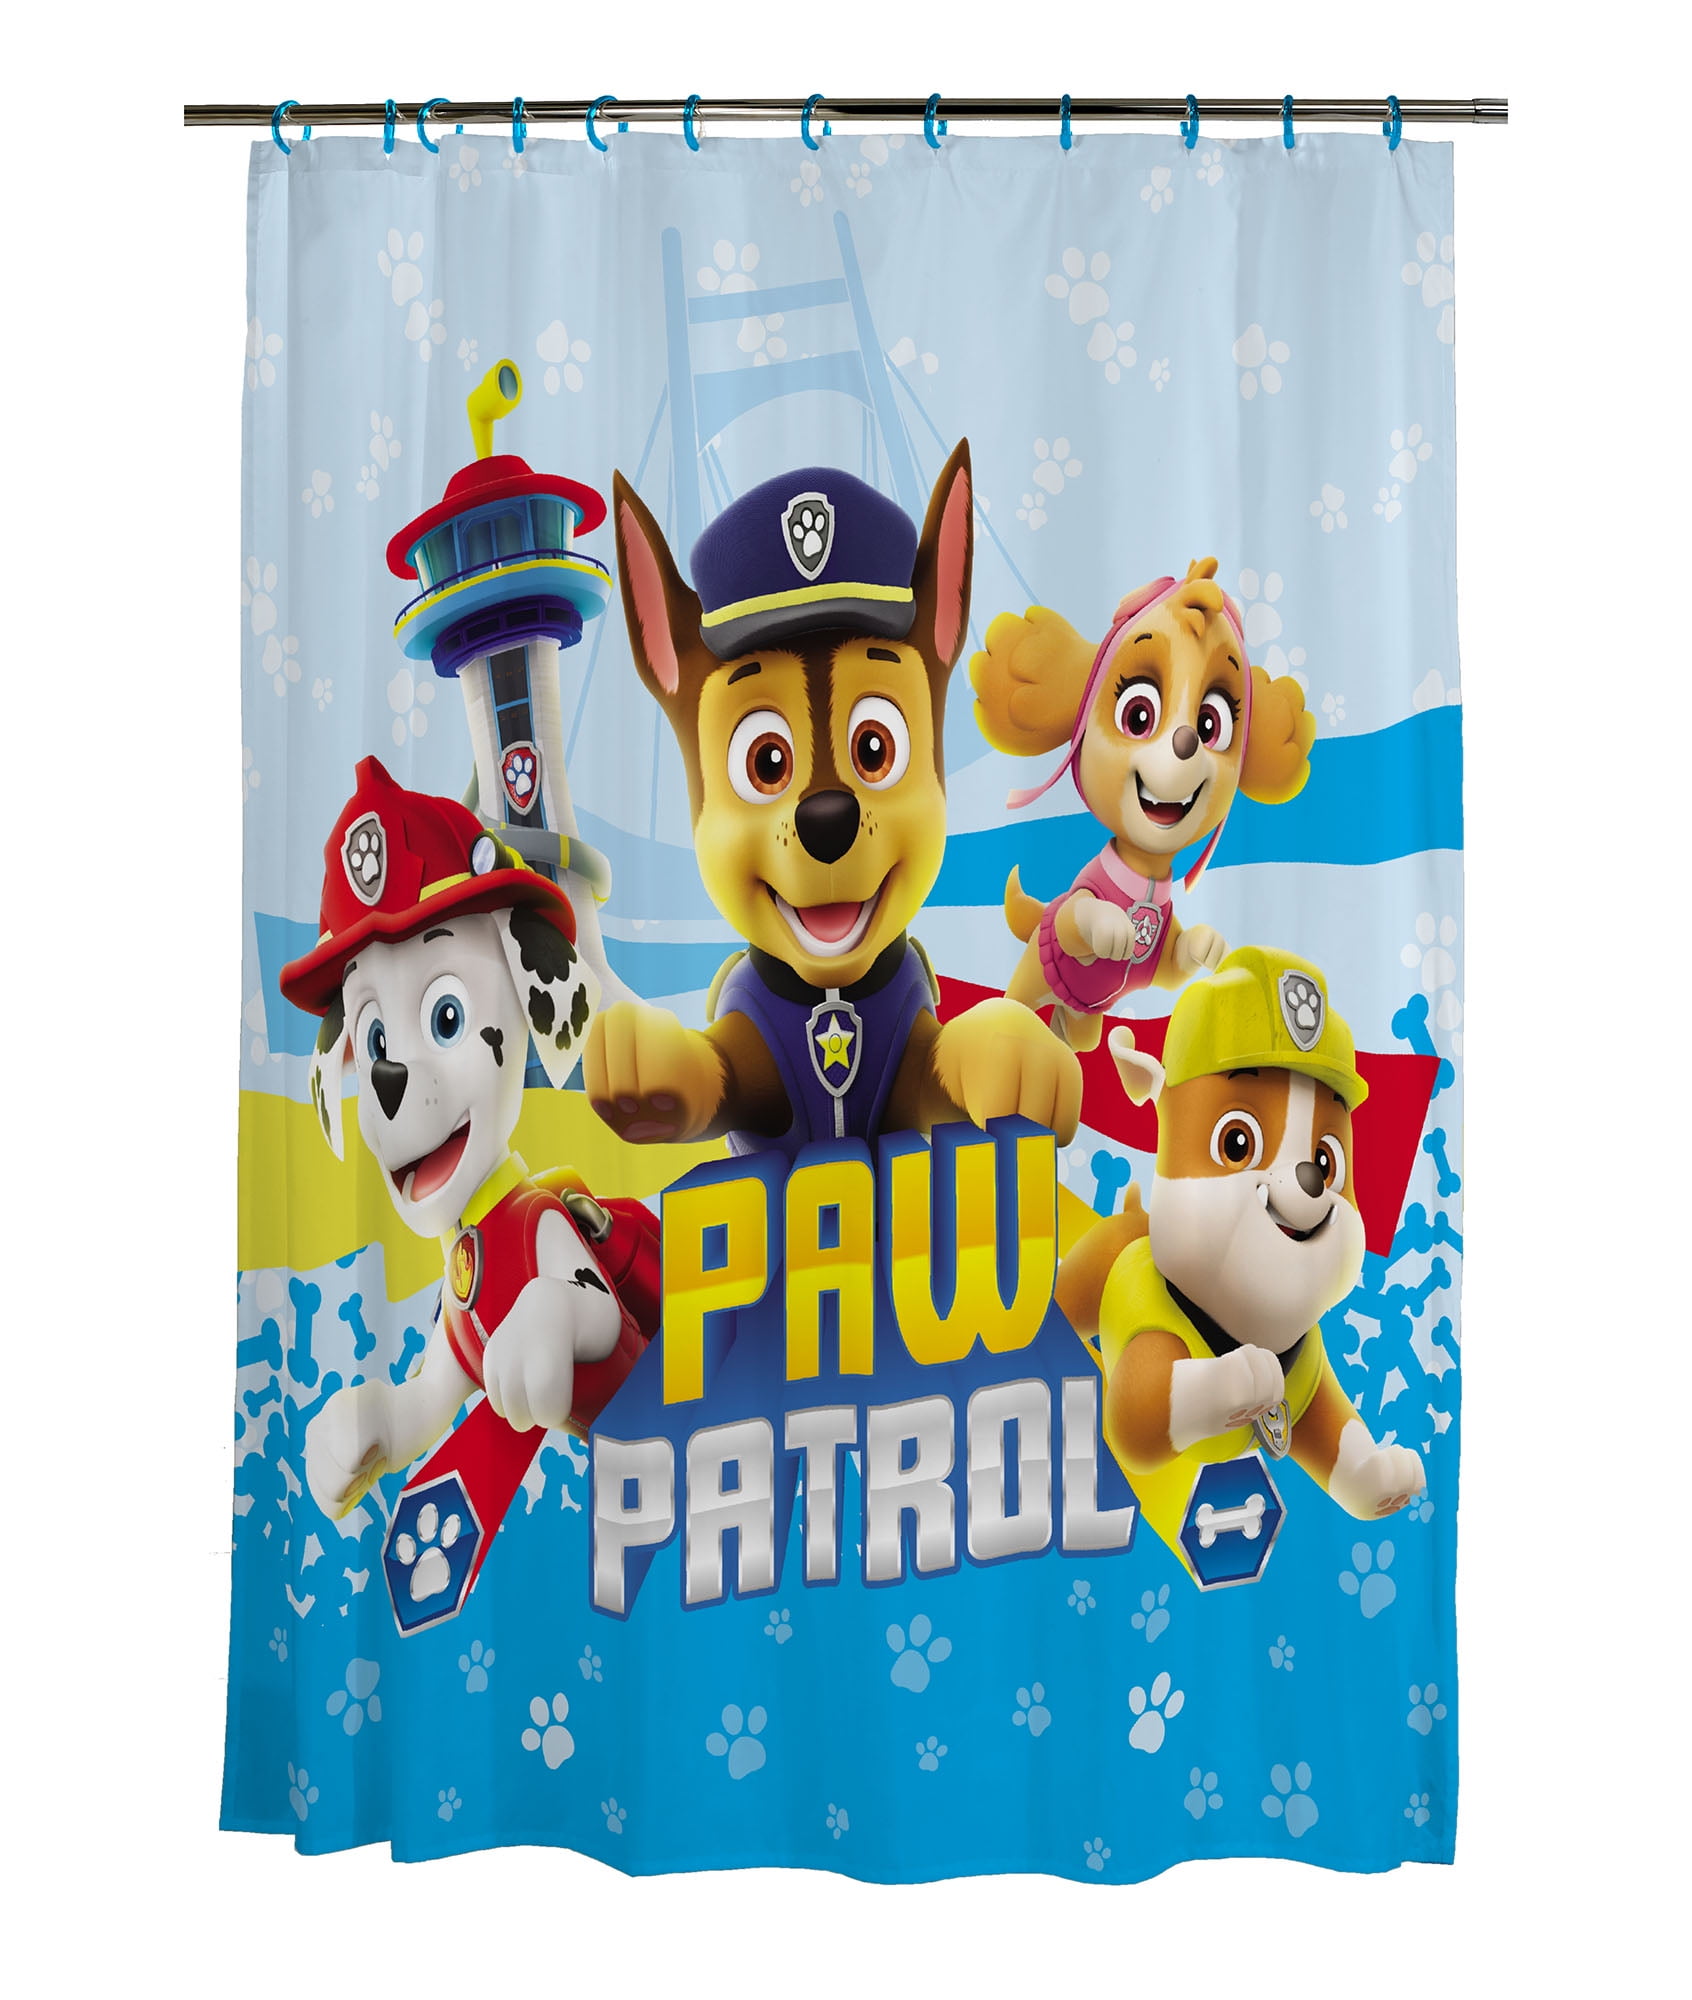 Details about   Nickelodeon Paw Patrol Fabric Shower Curtain 72x72” New Kids Bathroom Decor 